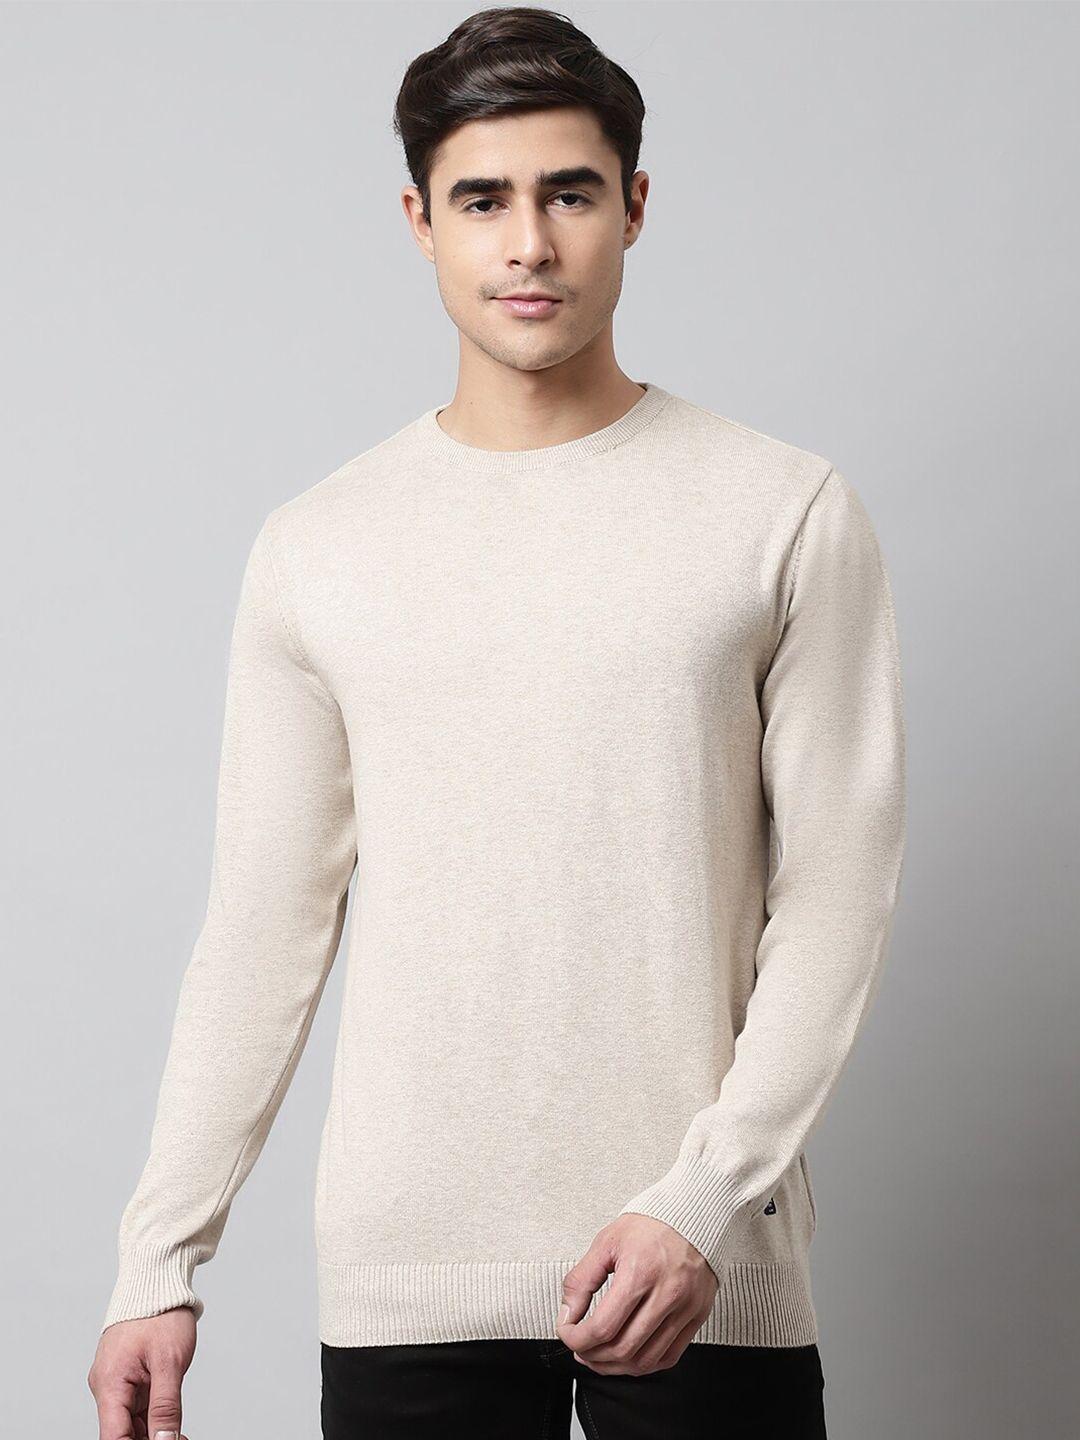 cantabil-men-round-neck-long-sleeves-wool-pullover